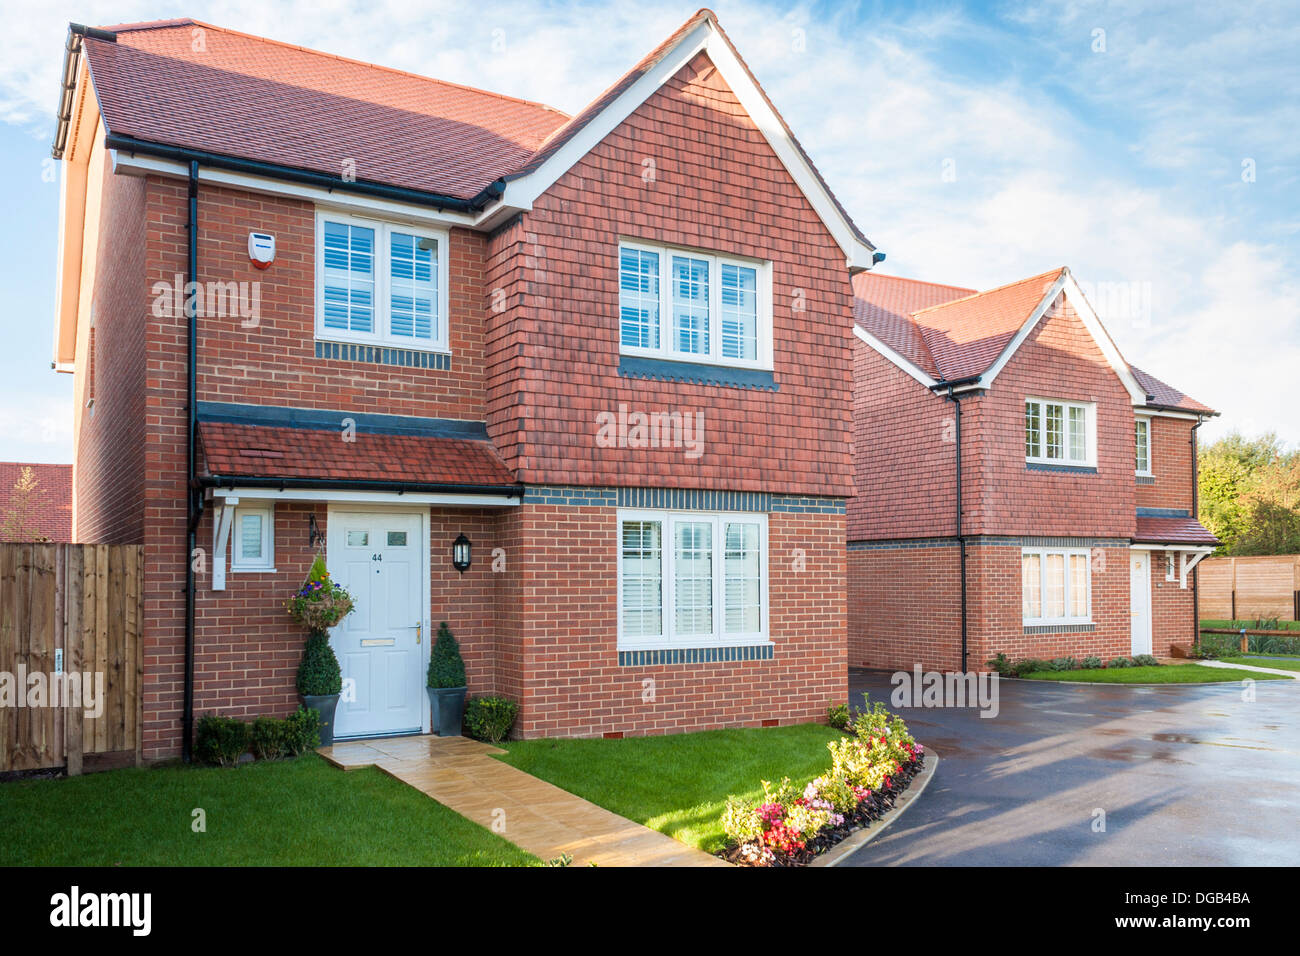 New house build housing estate in 2013. Reading, Berkshire, South East England, GB, UK Stock Photo